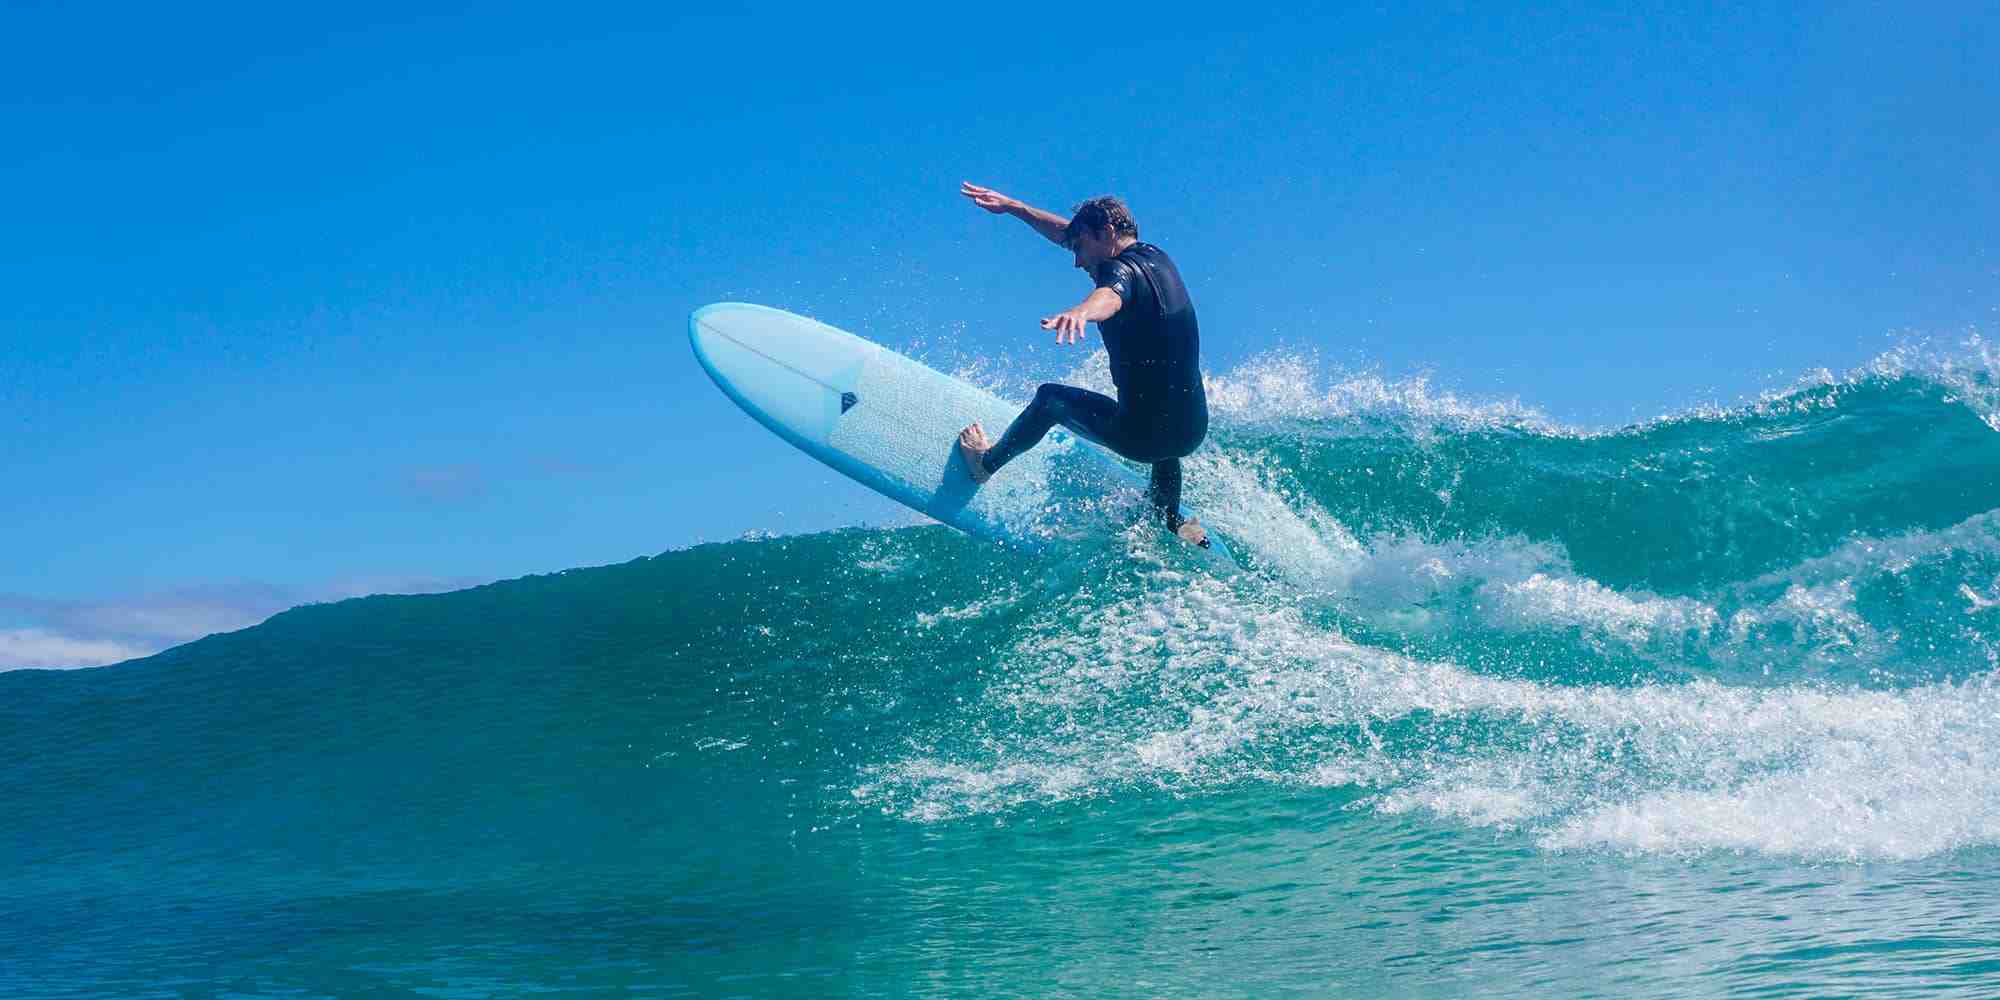 Is a 6 foot surfboard good for beginners?